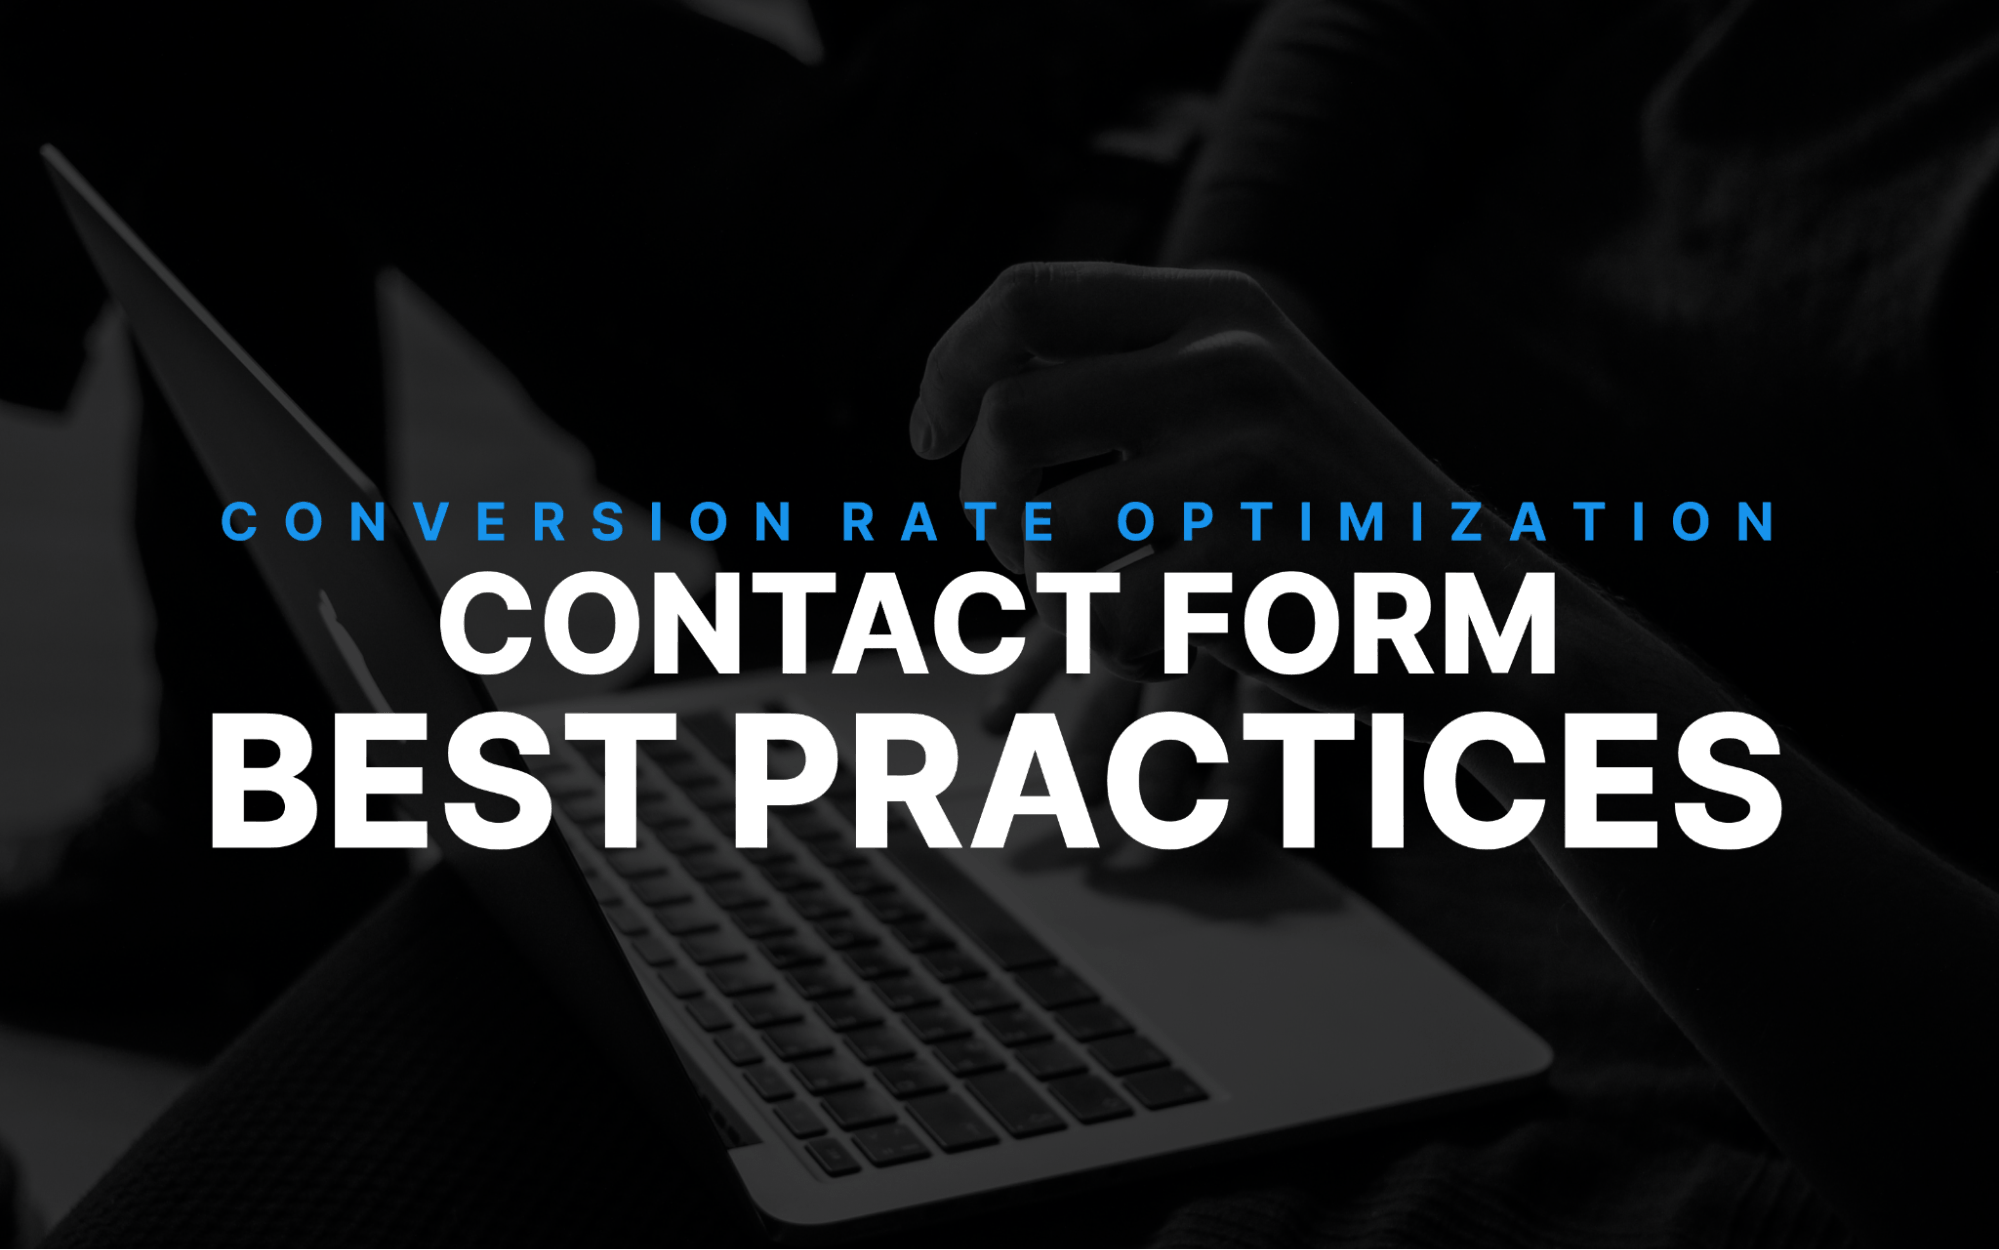 The 8 Contact Form Best Practices to Increase Your Conversion Rate